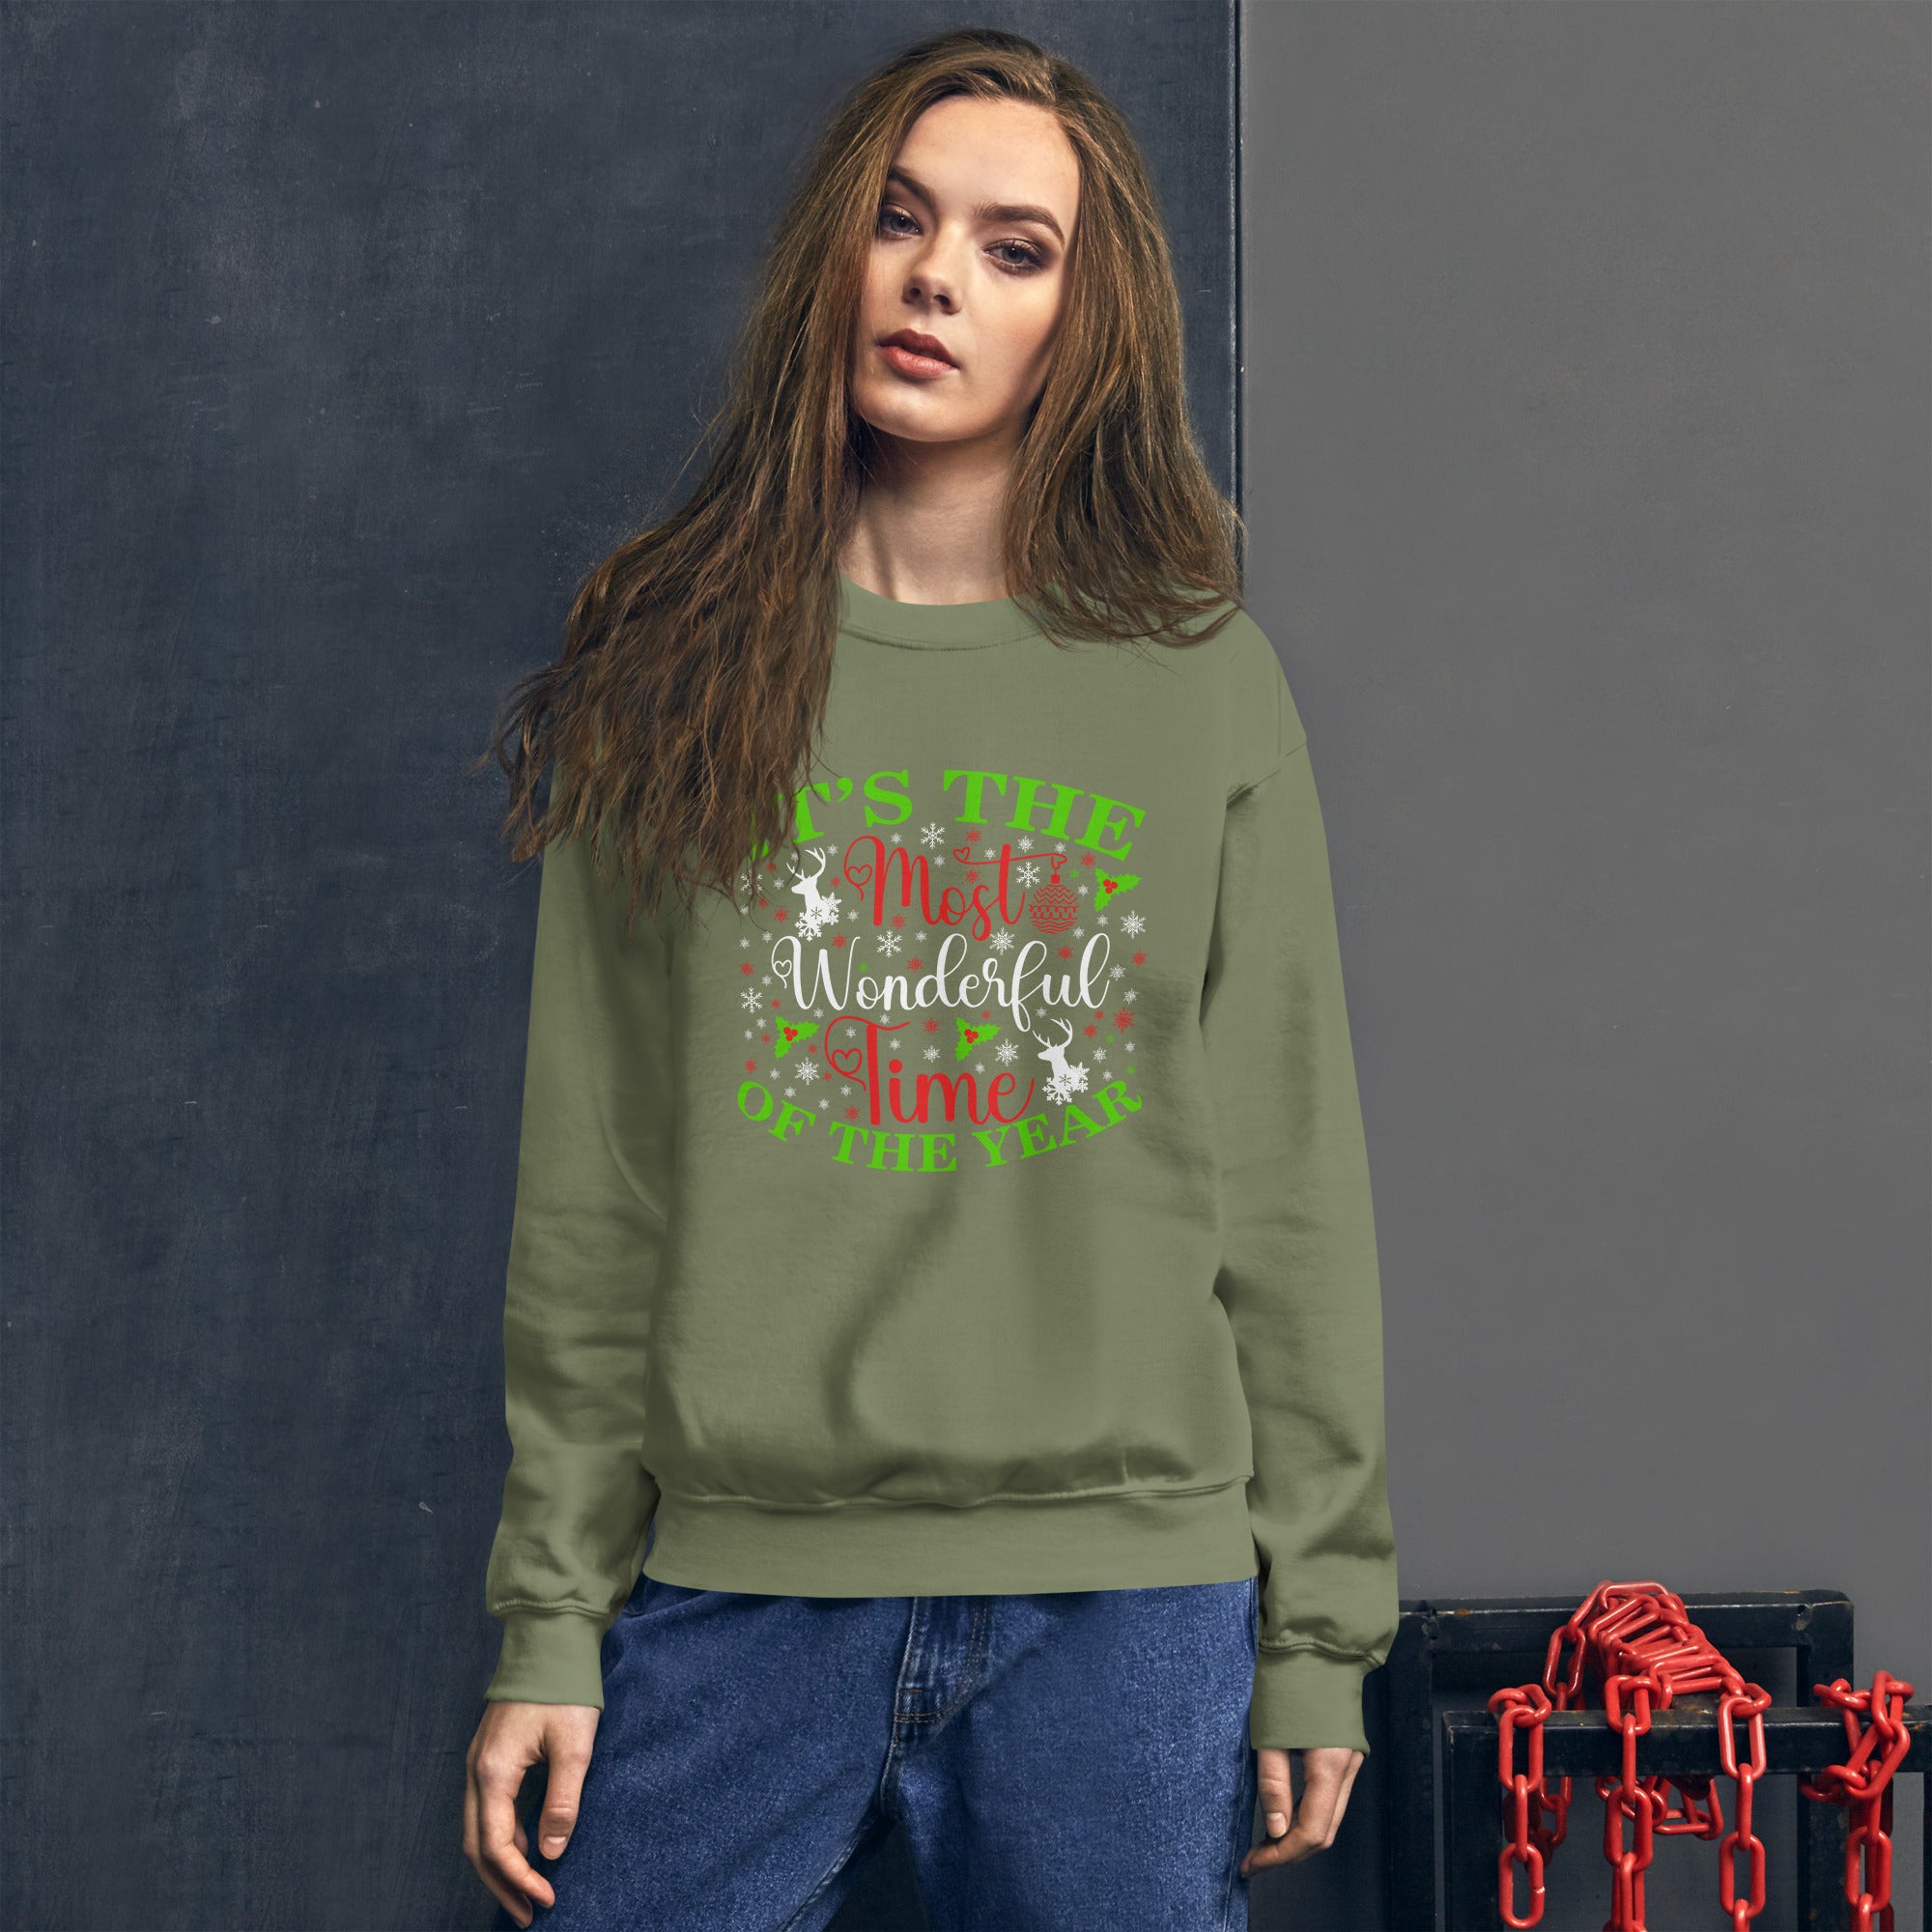 It's The Most Wonderful Time Of The Year Women's Sweatshirt Merry Christmas Jumper